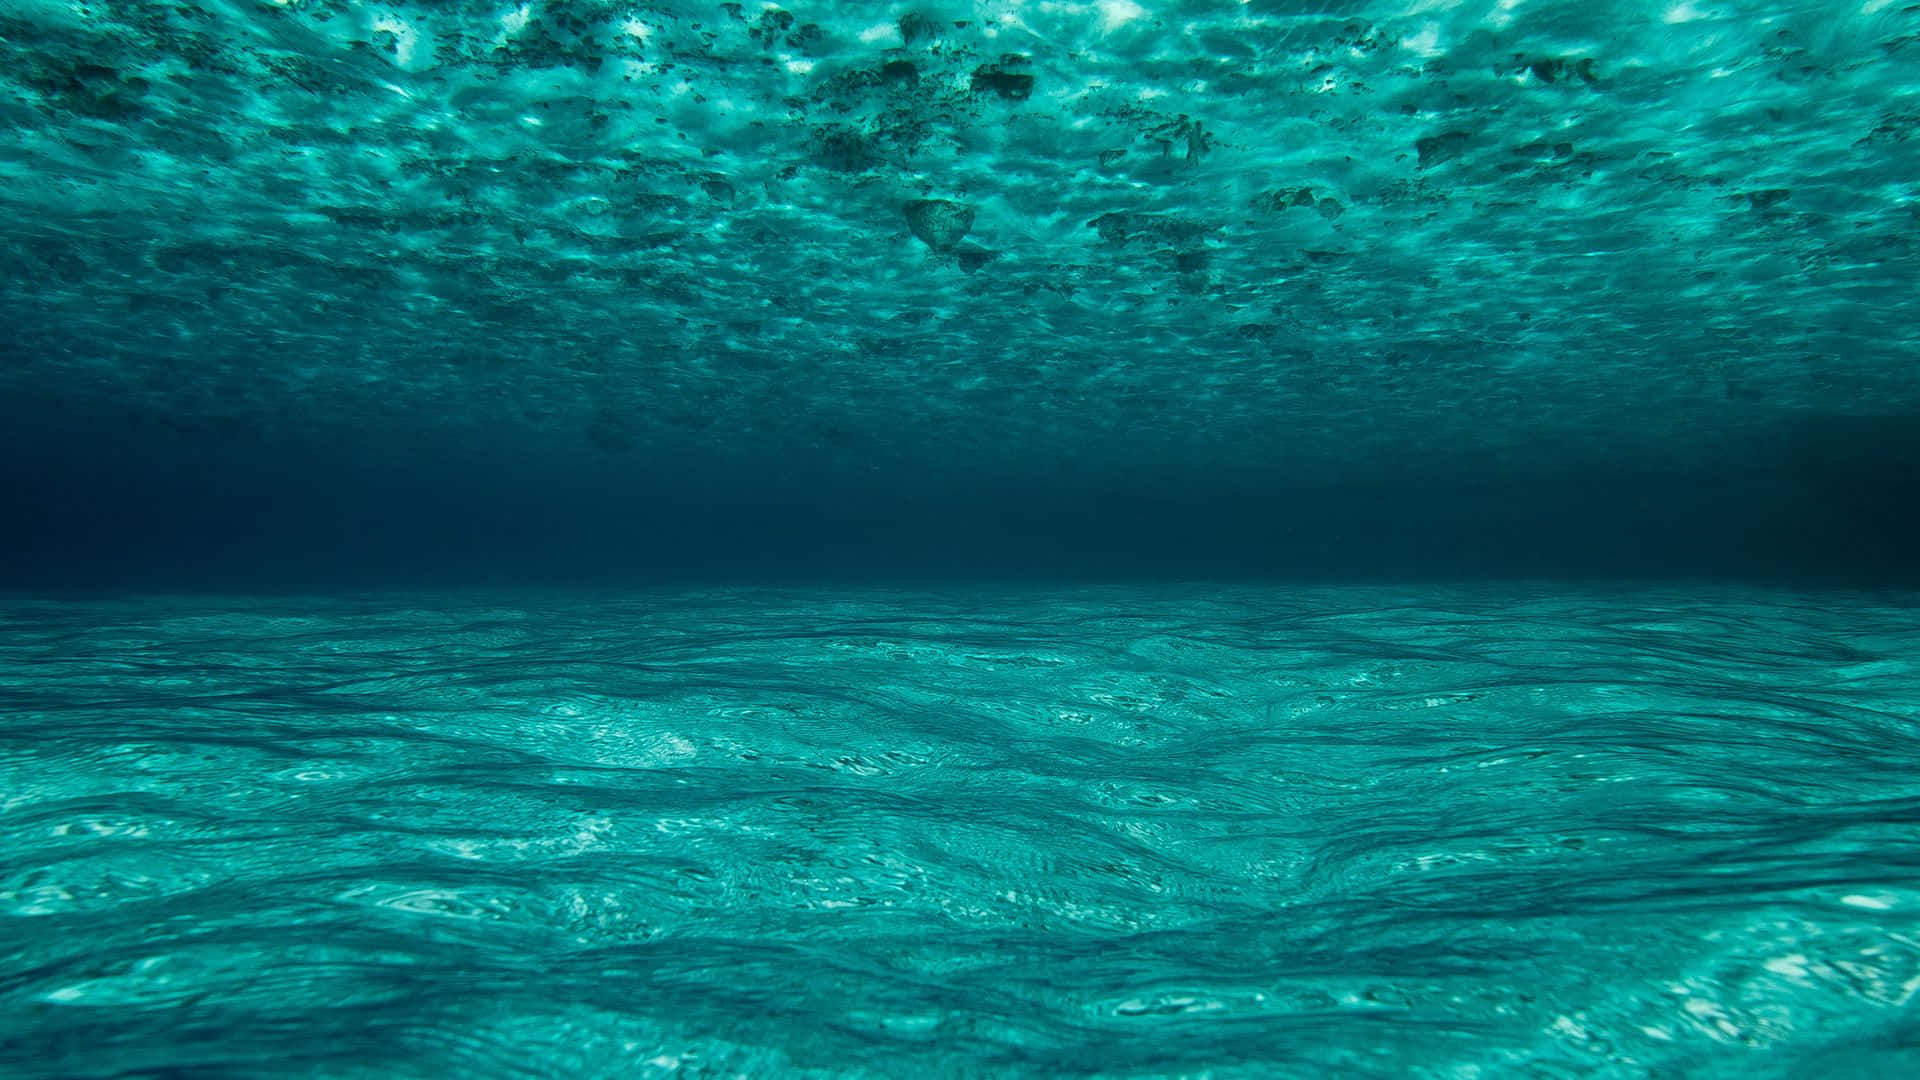 a view of the ocean floor from the bottom